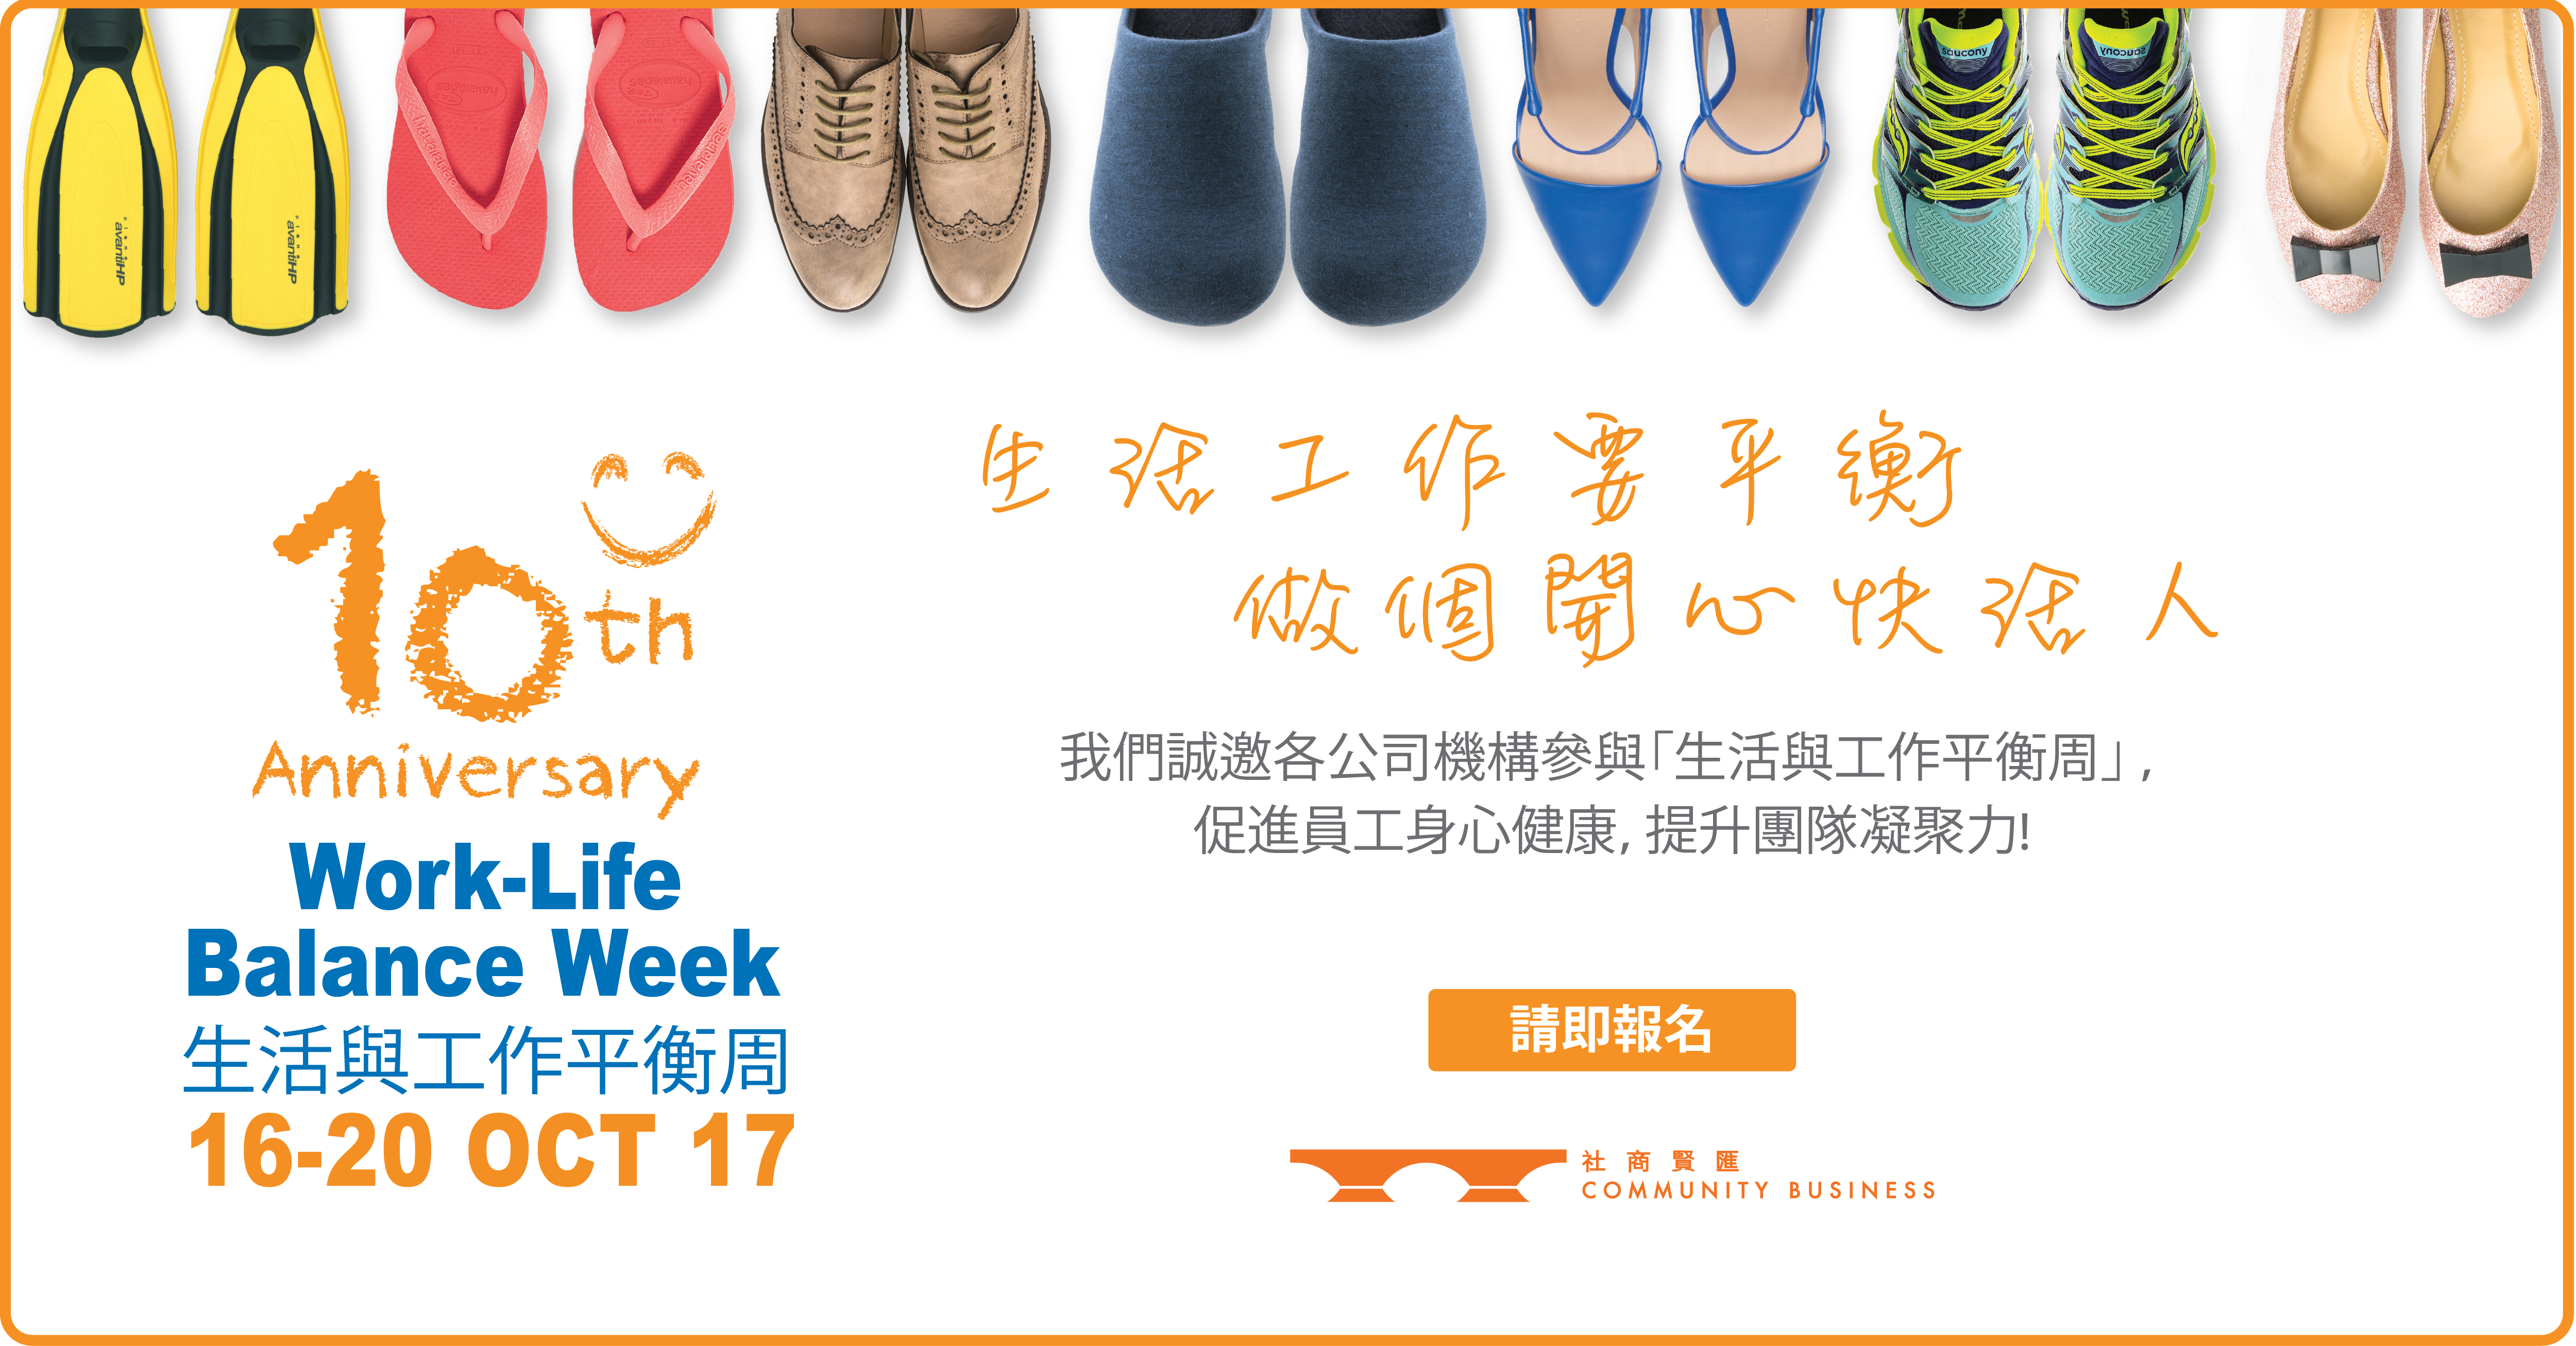 Promotional banner of Work-Life Balance Week by Community Business